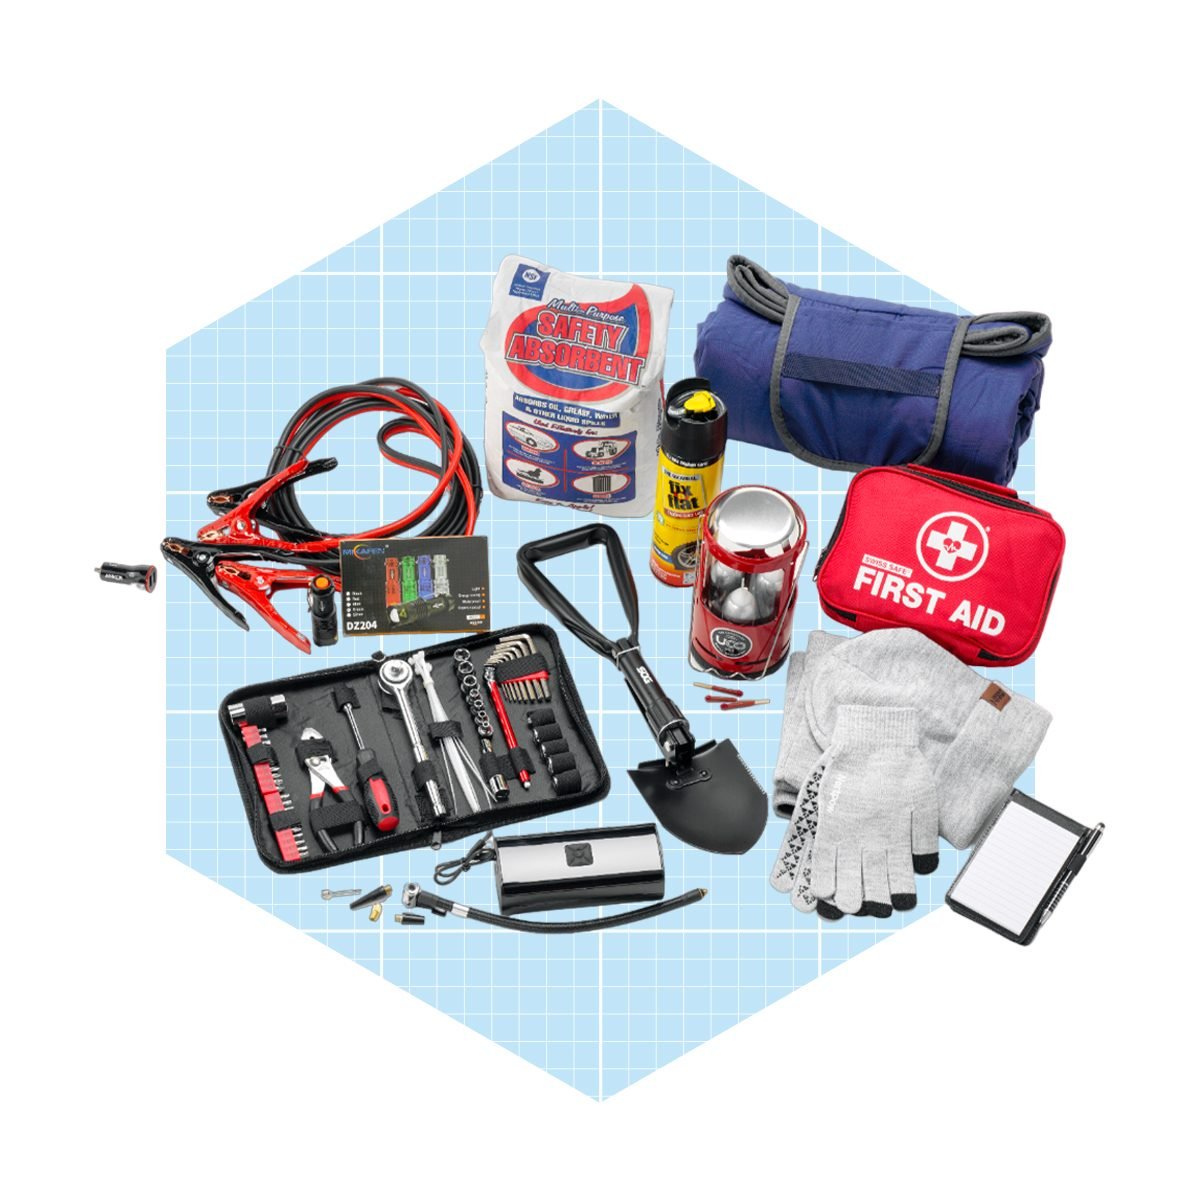 Lifesystems Survival Bag | Cotswold Outdoor